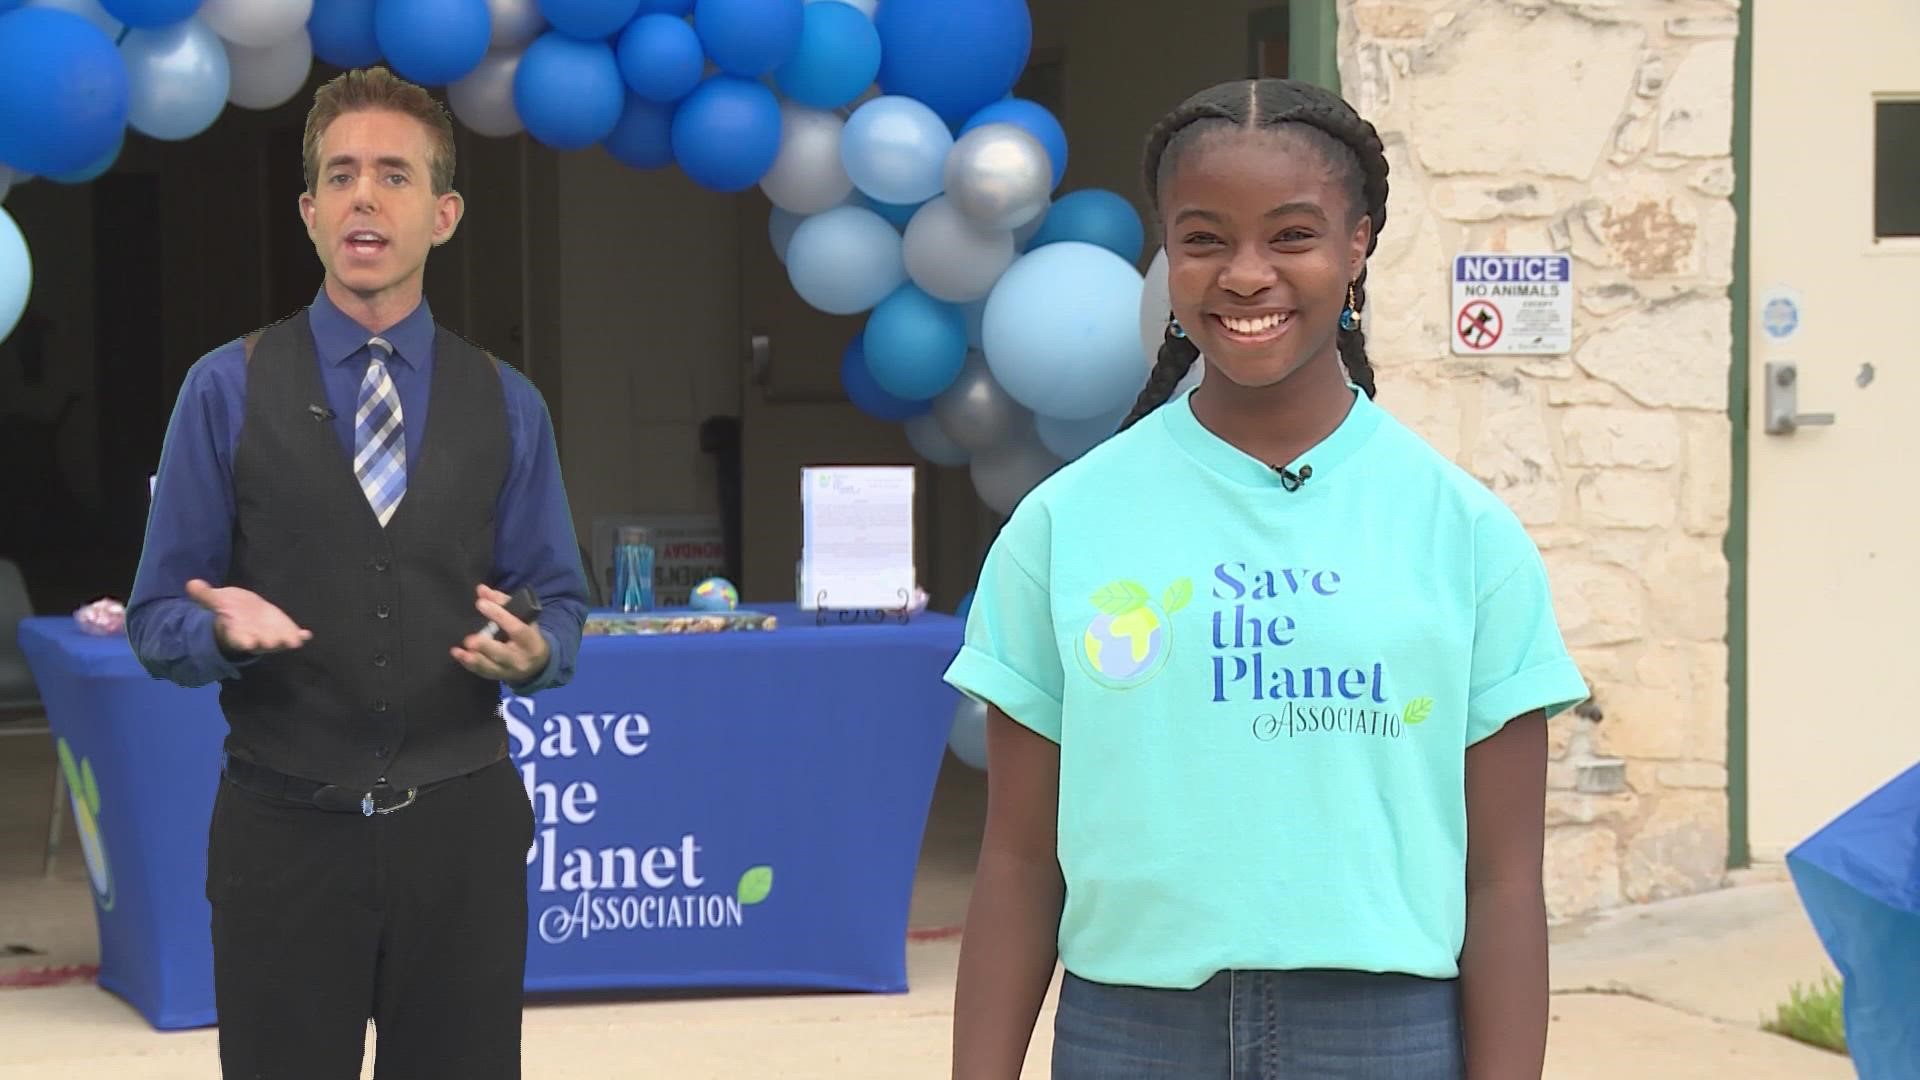 A San Antonio teen started raising awareness about endangered animals at age 7. Now, with the help of her parents, she's taken new steps to do more for the planet.